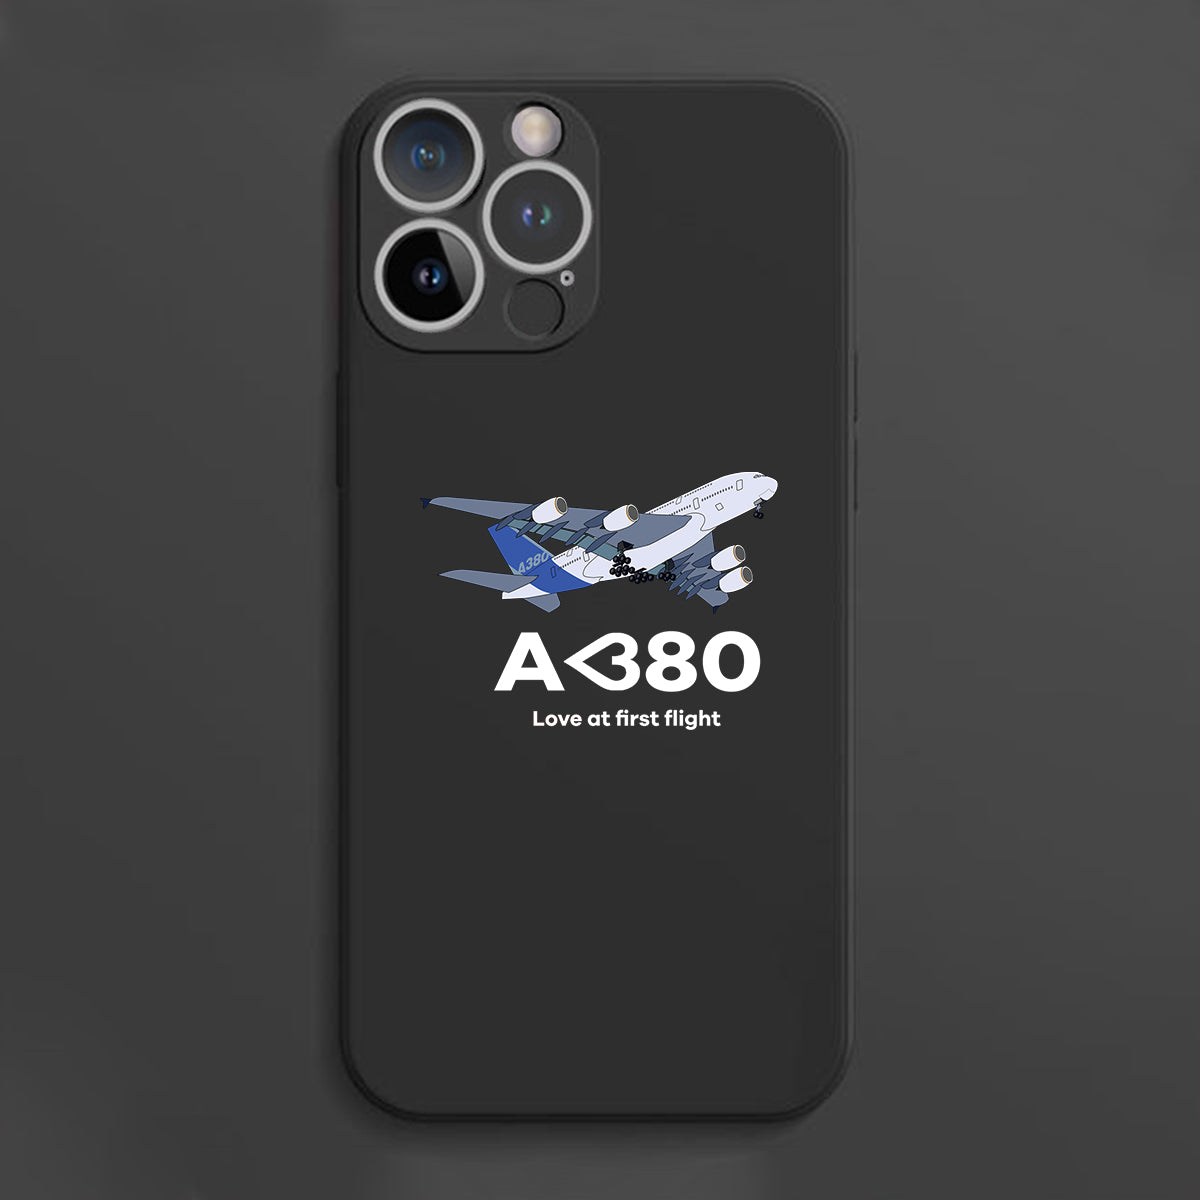 Airbus A380 Love at first flight Designed Soft Silicone iPhone Cases